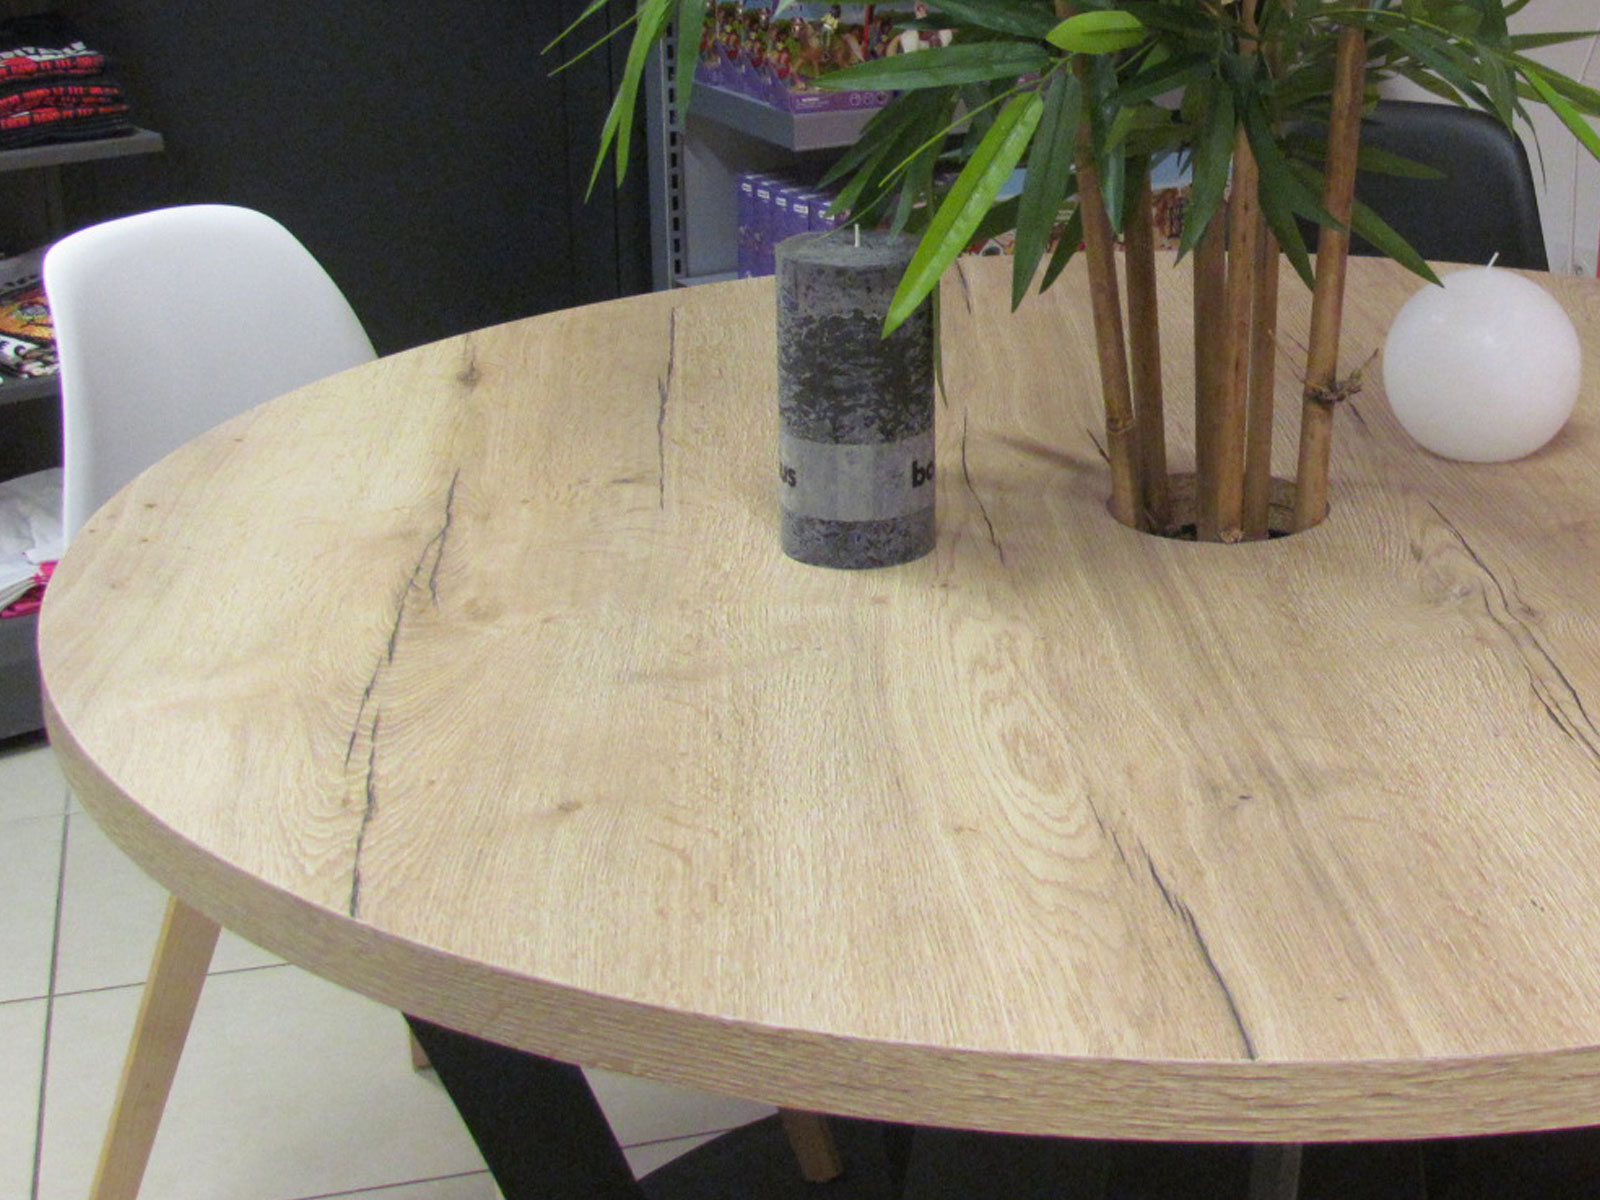 custom-designed table with space for a tree in the middle